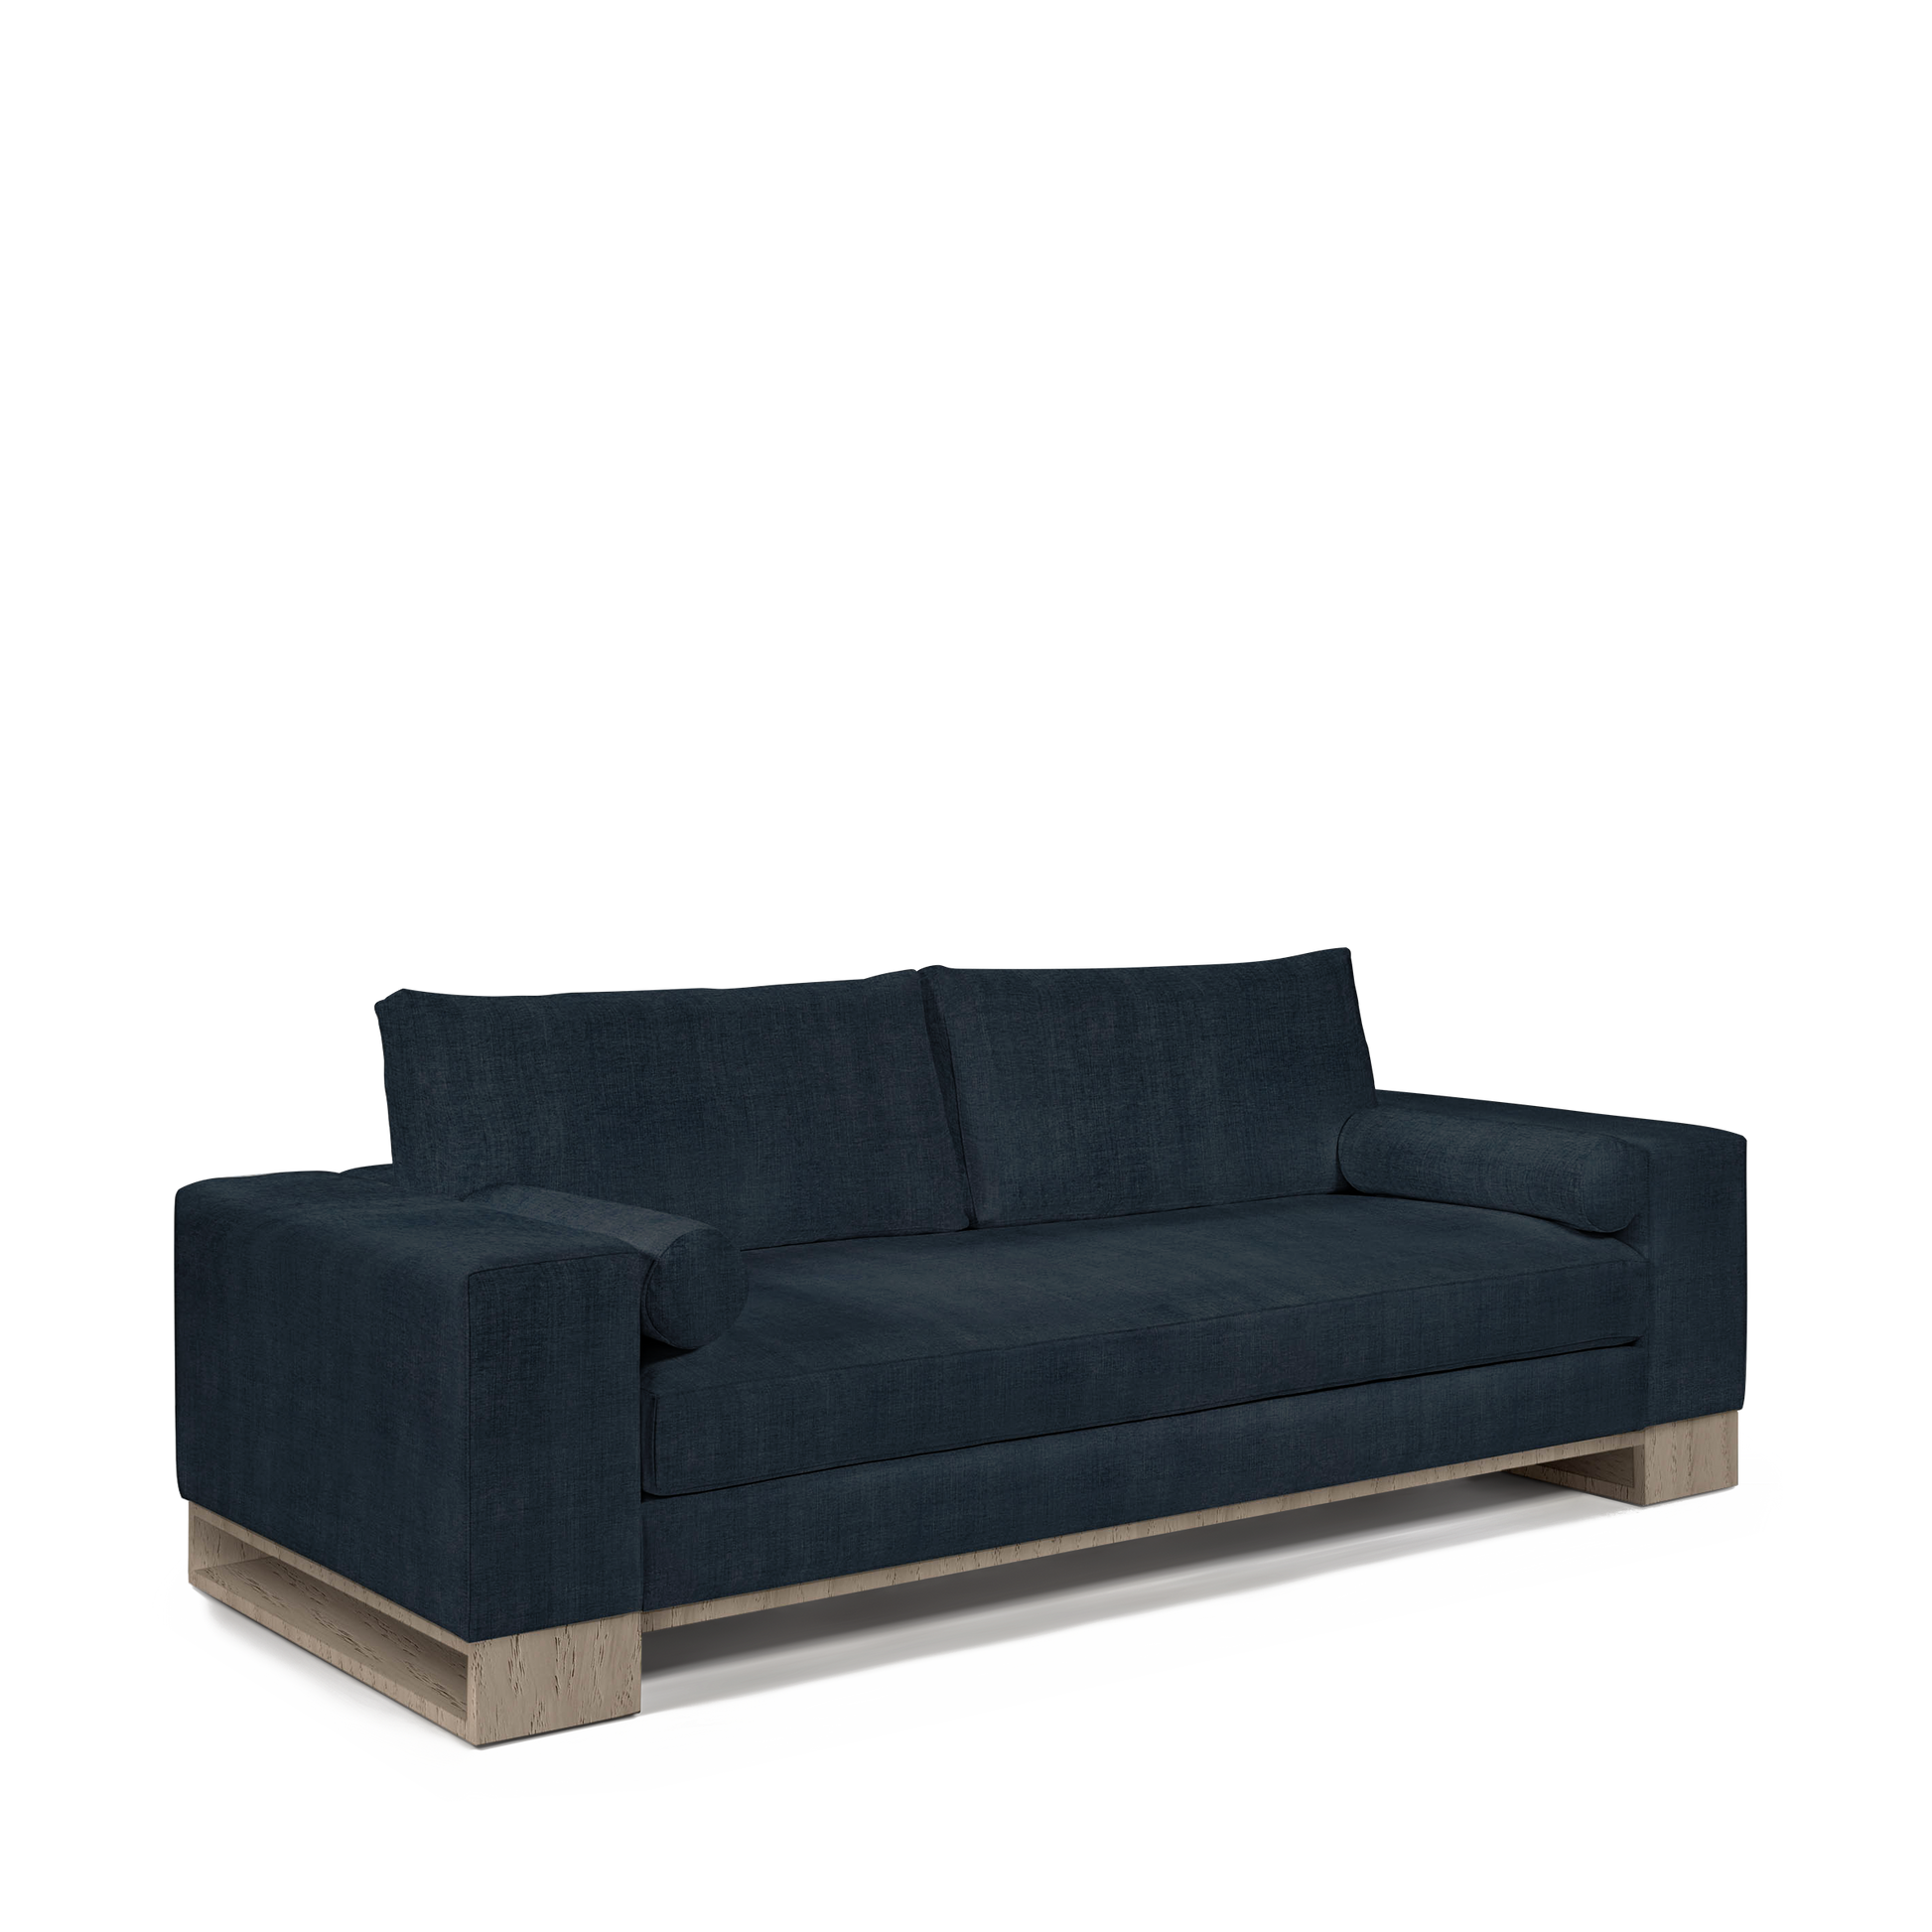 TERRA 2,5-seater sofa with linco dark blue textile and natural grey wood legs 